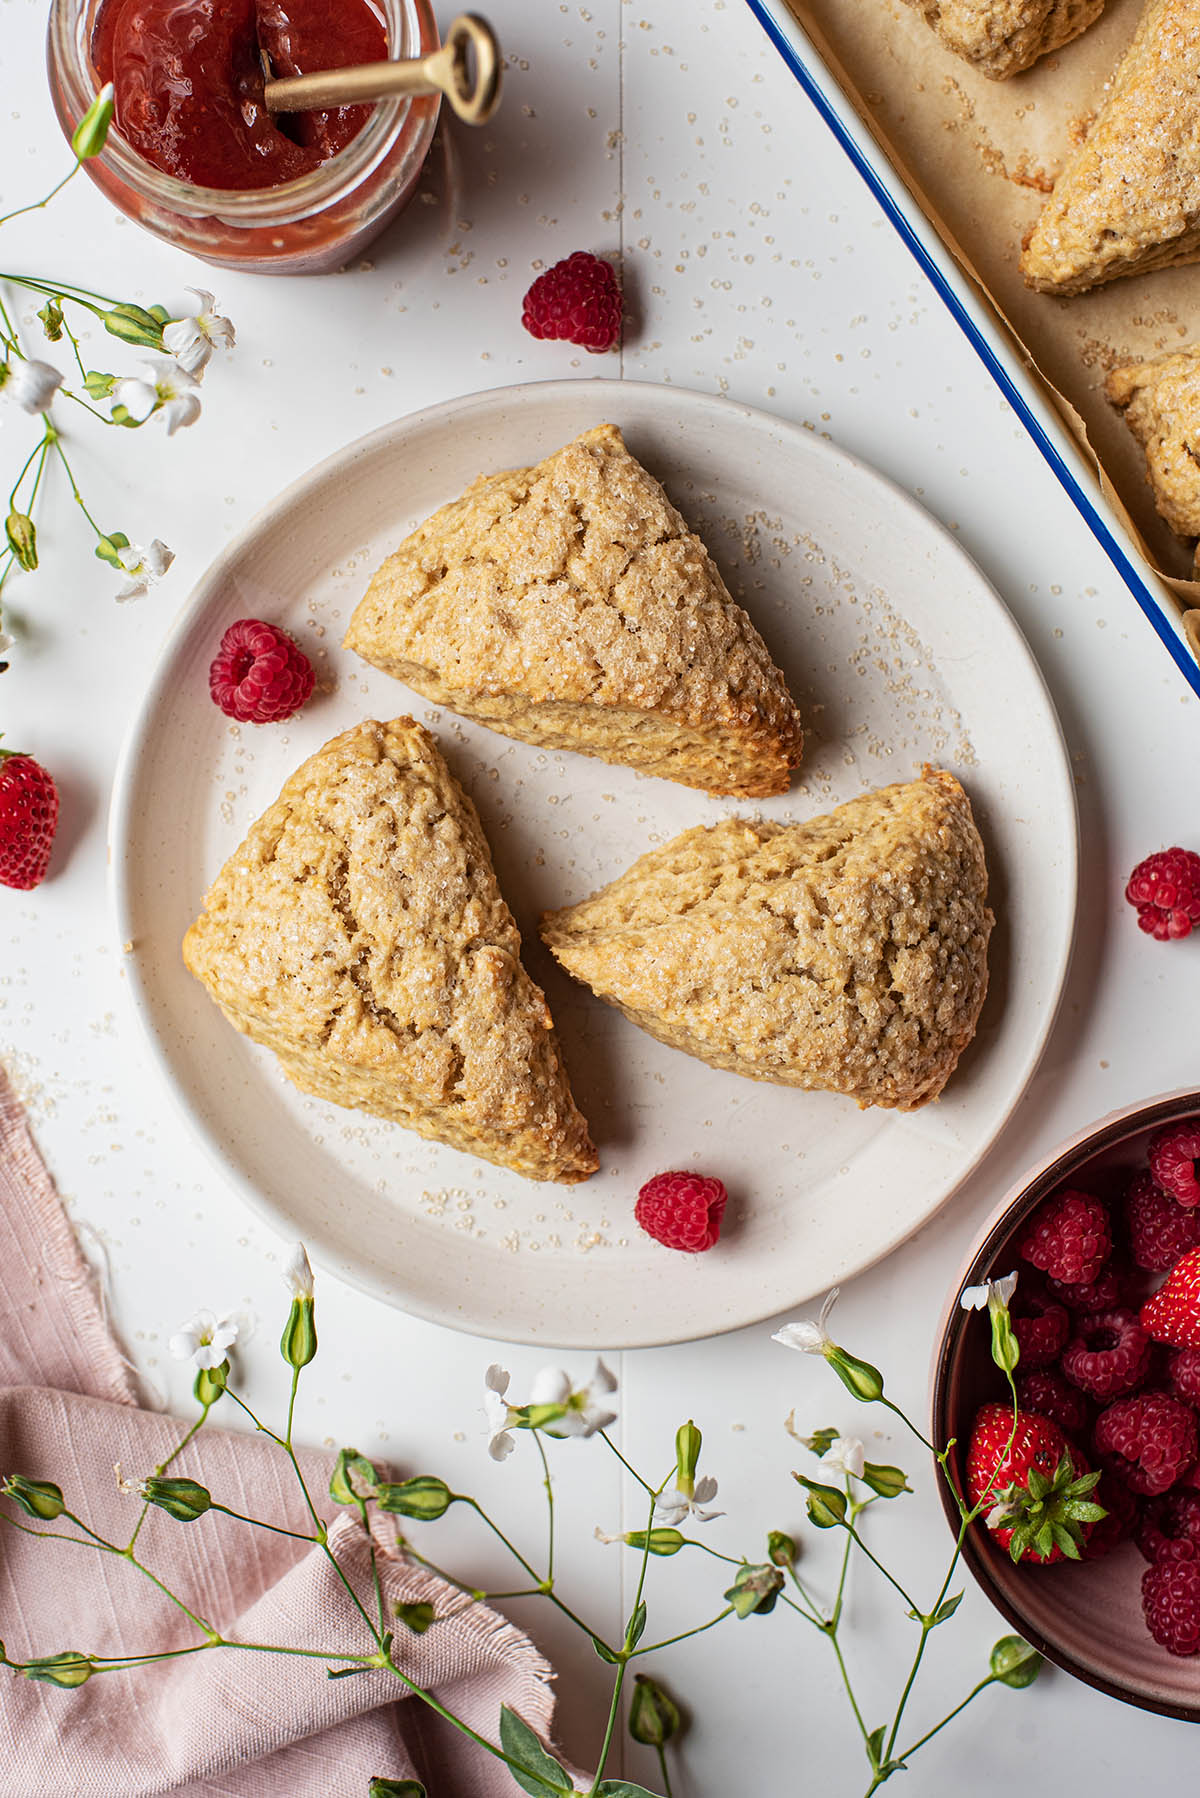 Three scones on a plate with raspberries.